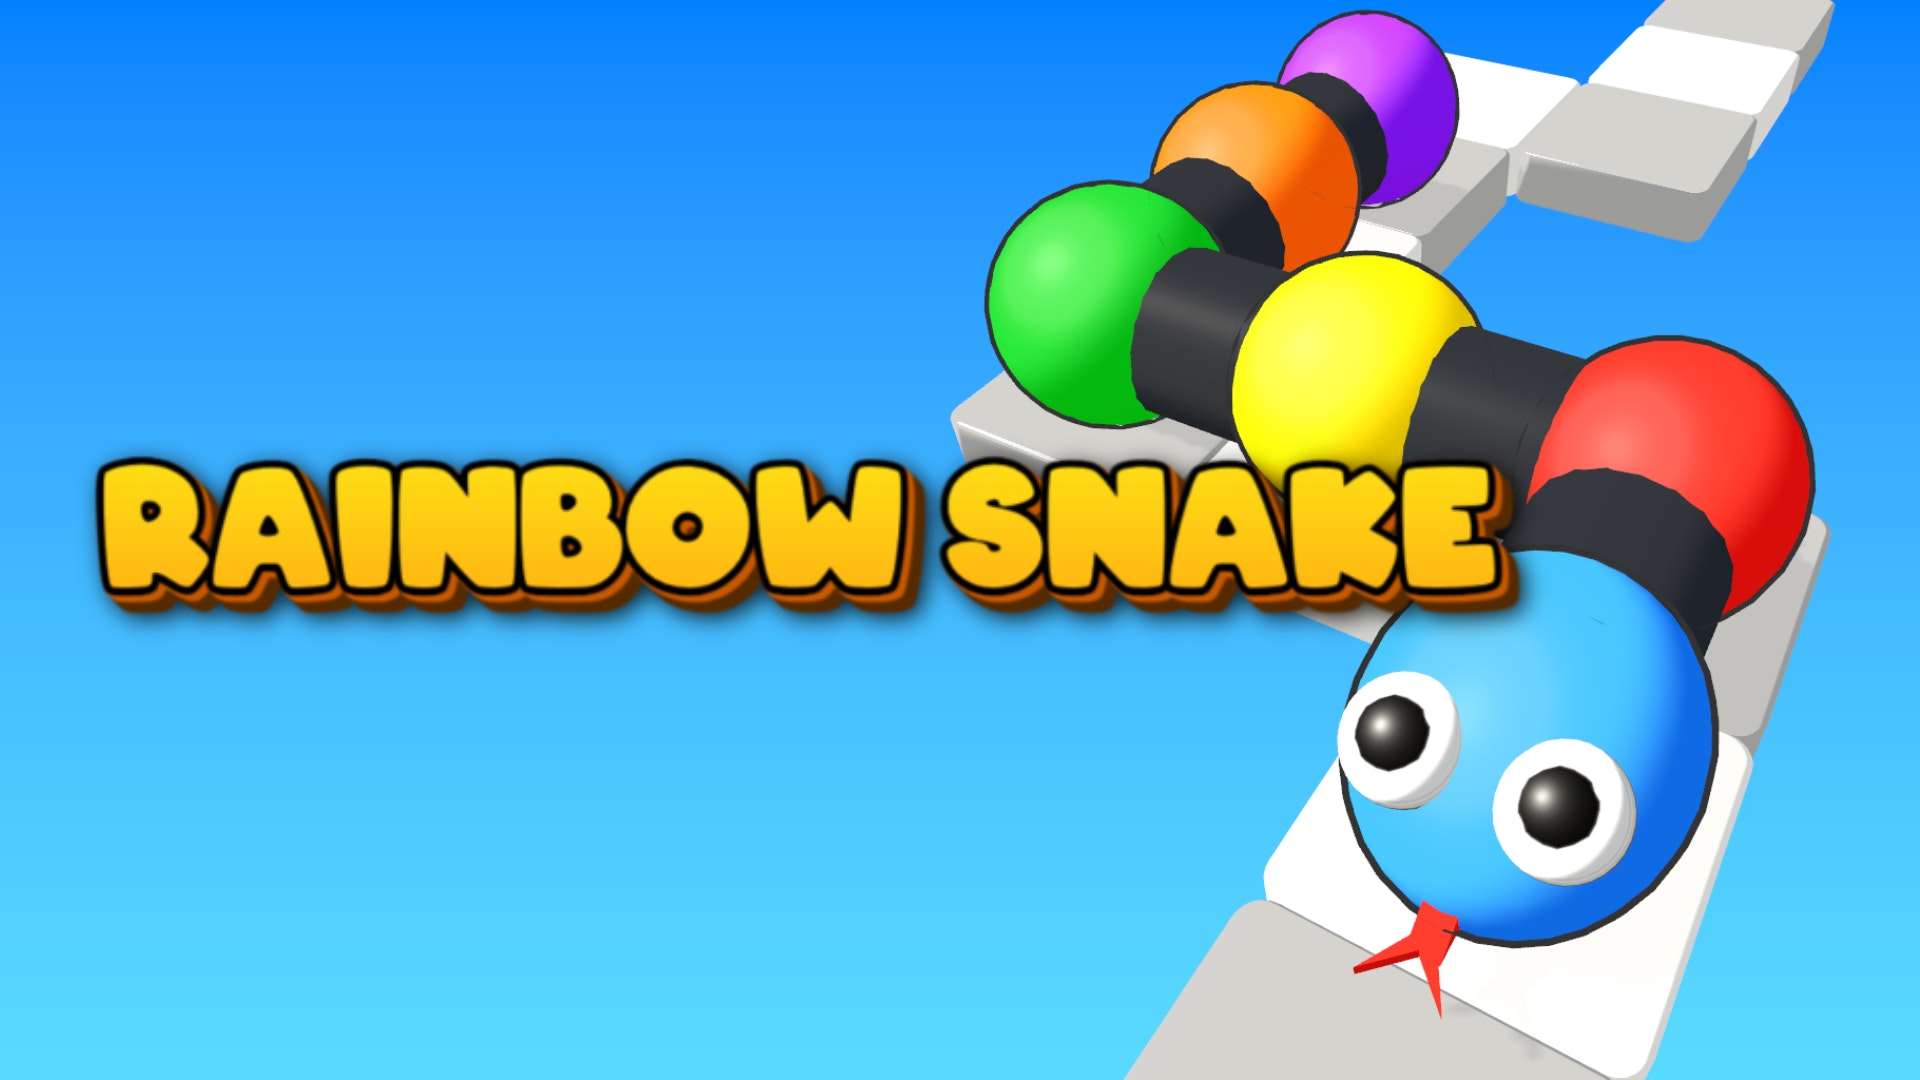 Play Snake Clash.io Online for Free on PC & Mobile